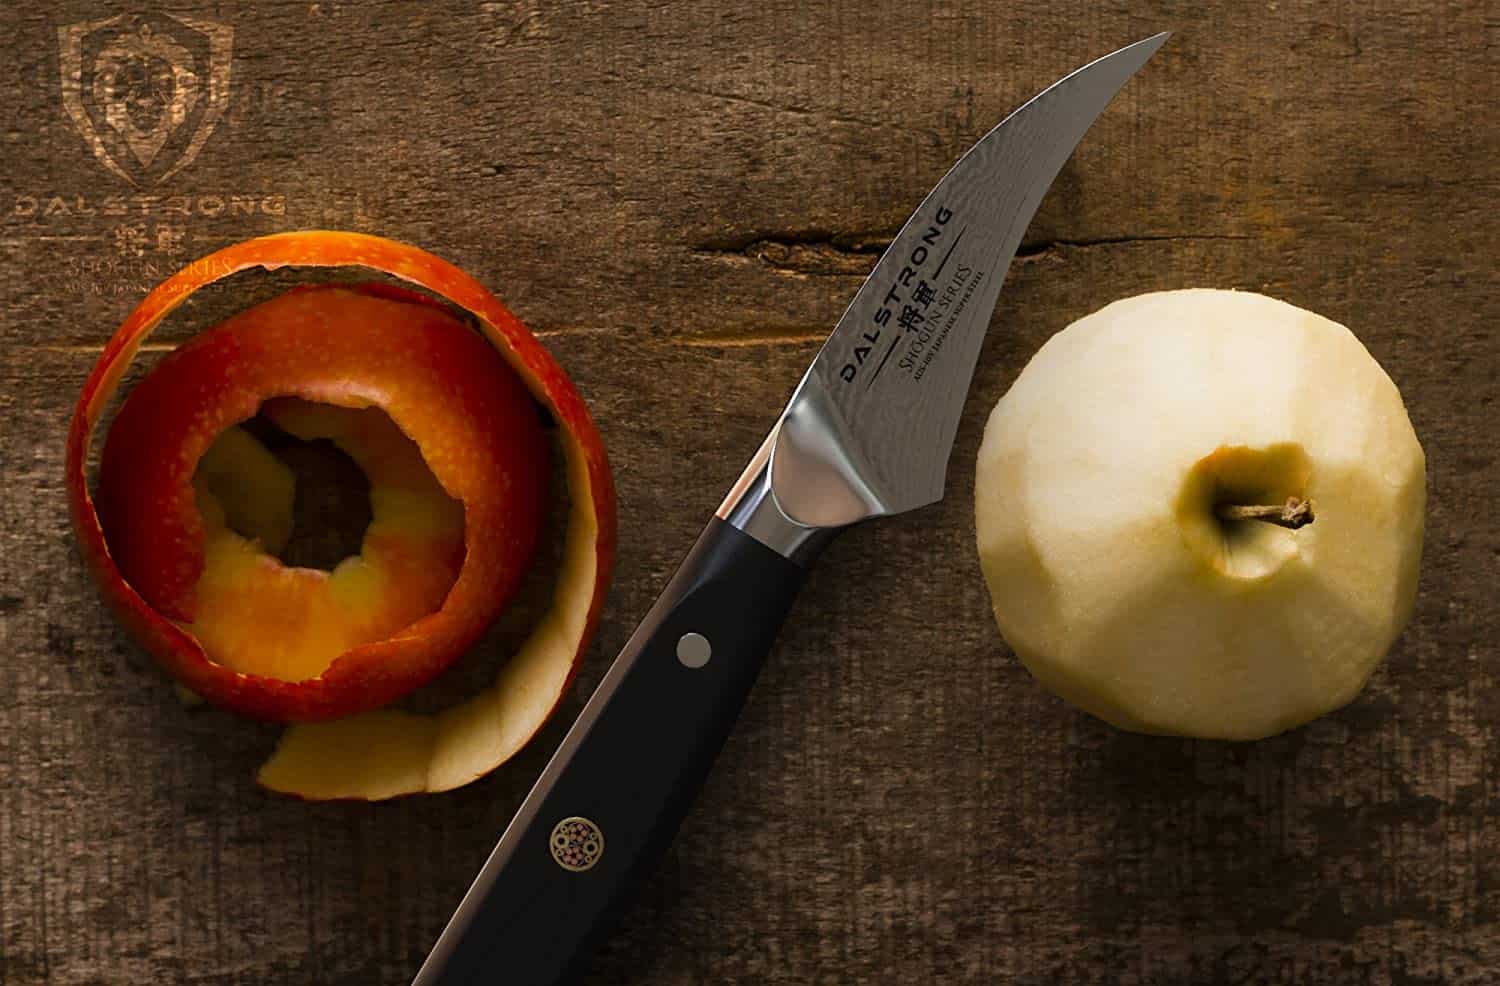 Best peeling knife- DALSTRONG Tourne 3 with apple